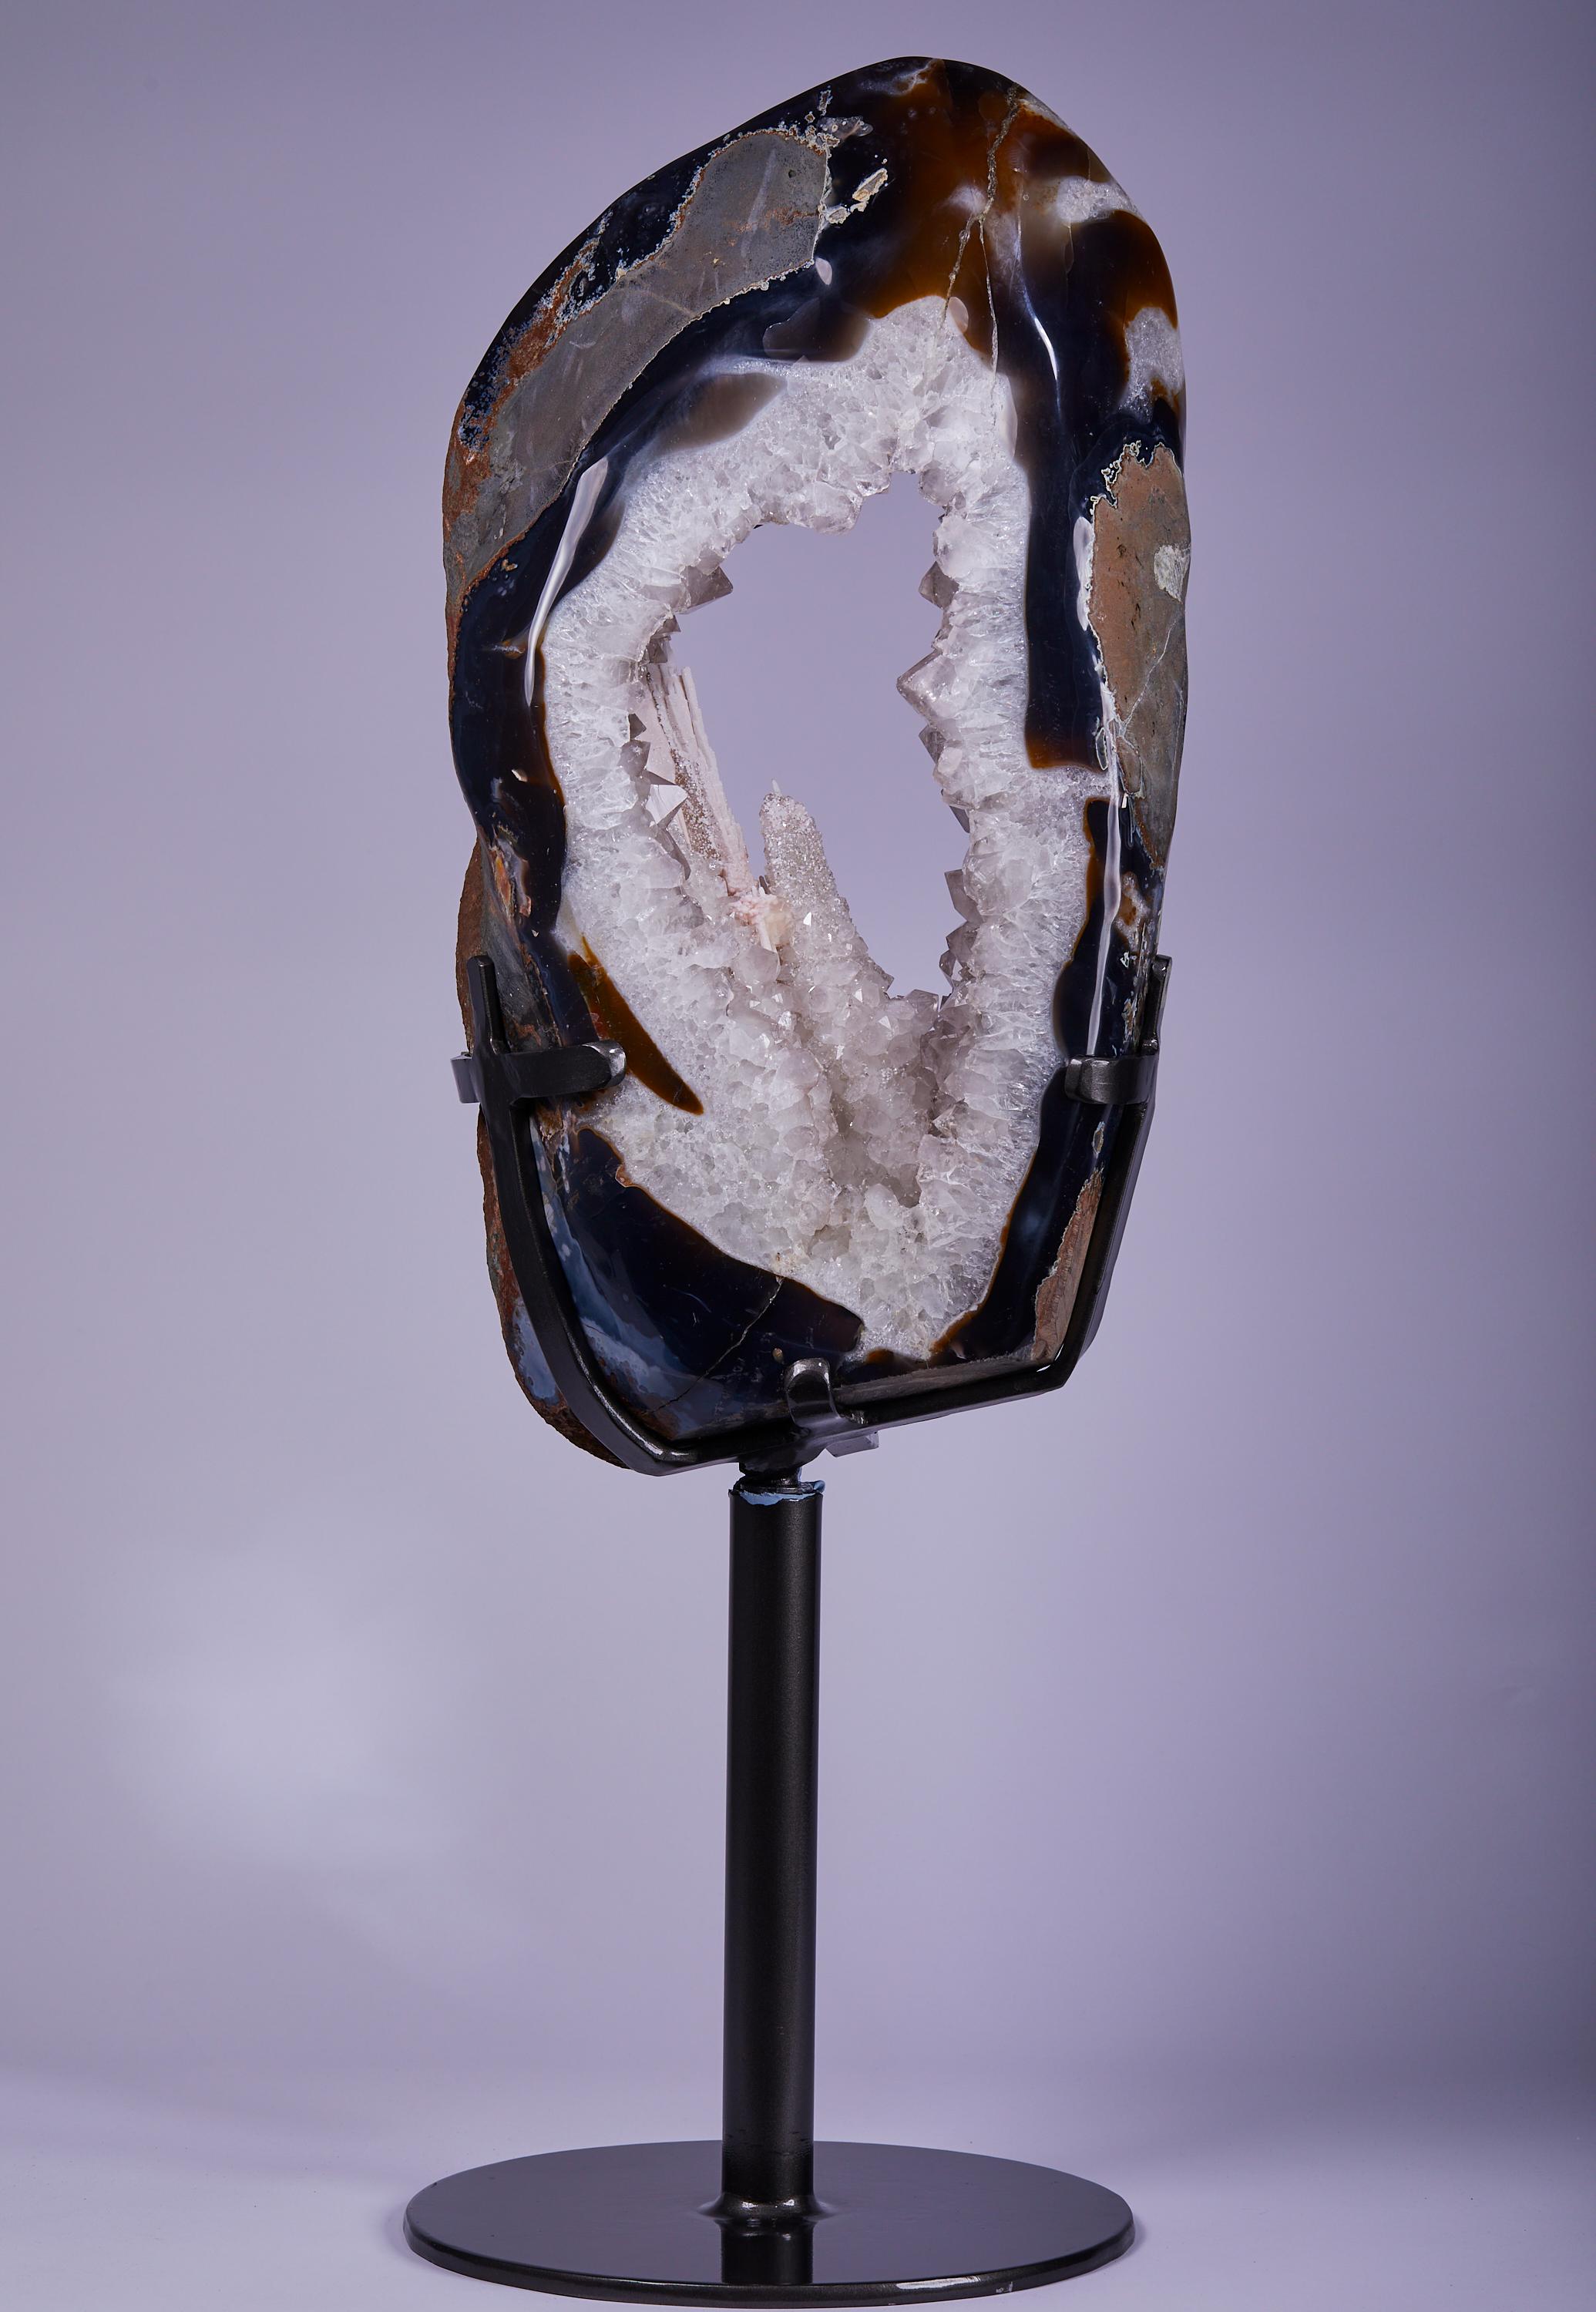 Agatised Geode Slice with Rare Central Calcite Formation and White Quartz For Sale 11